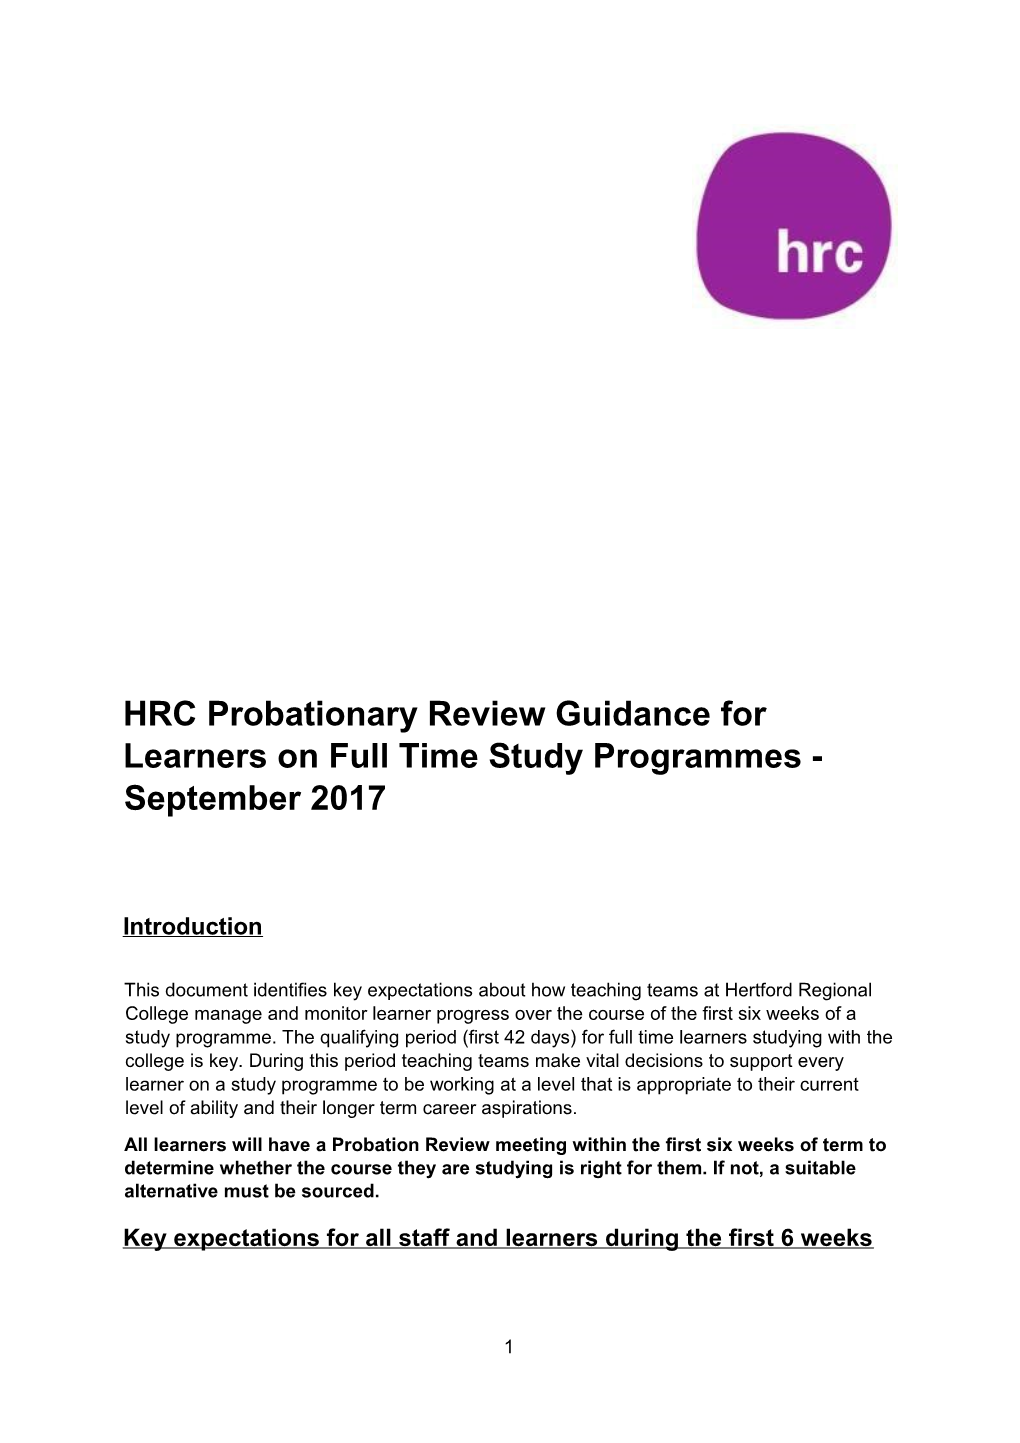 HRC Probationary Review Guidance For